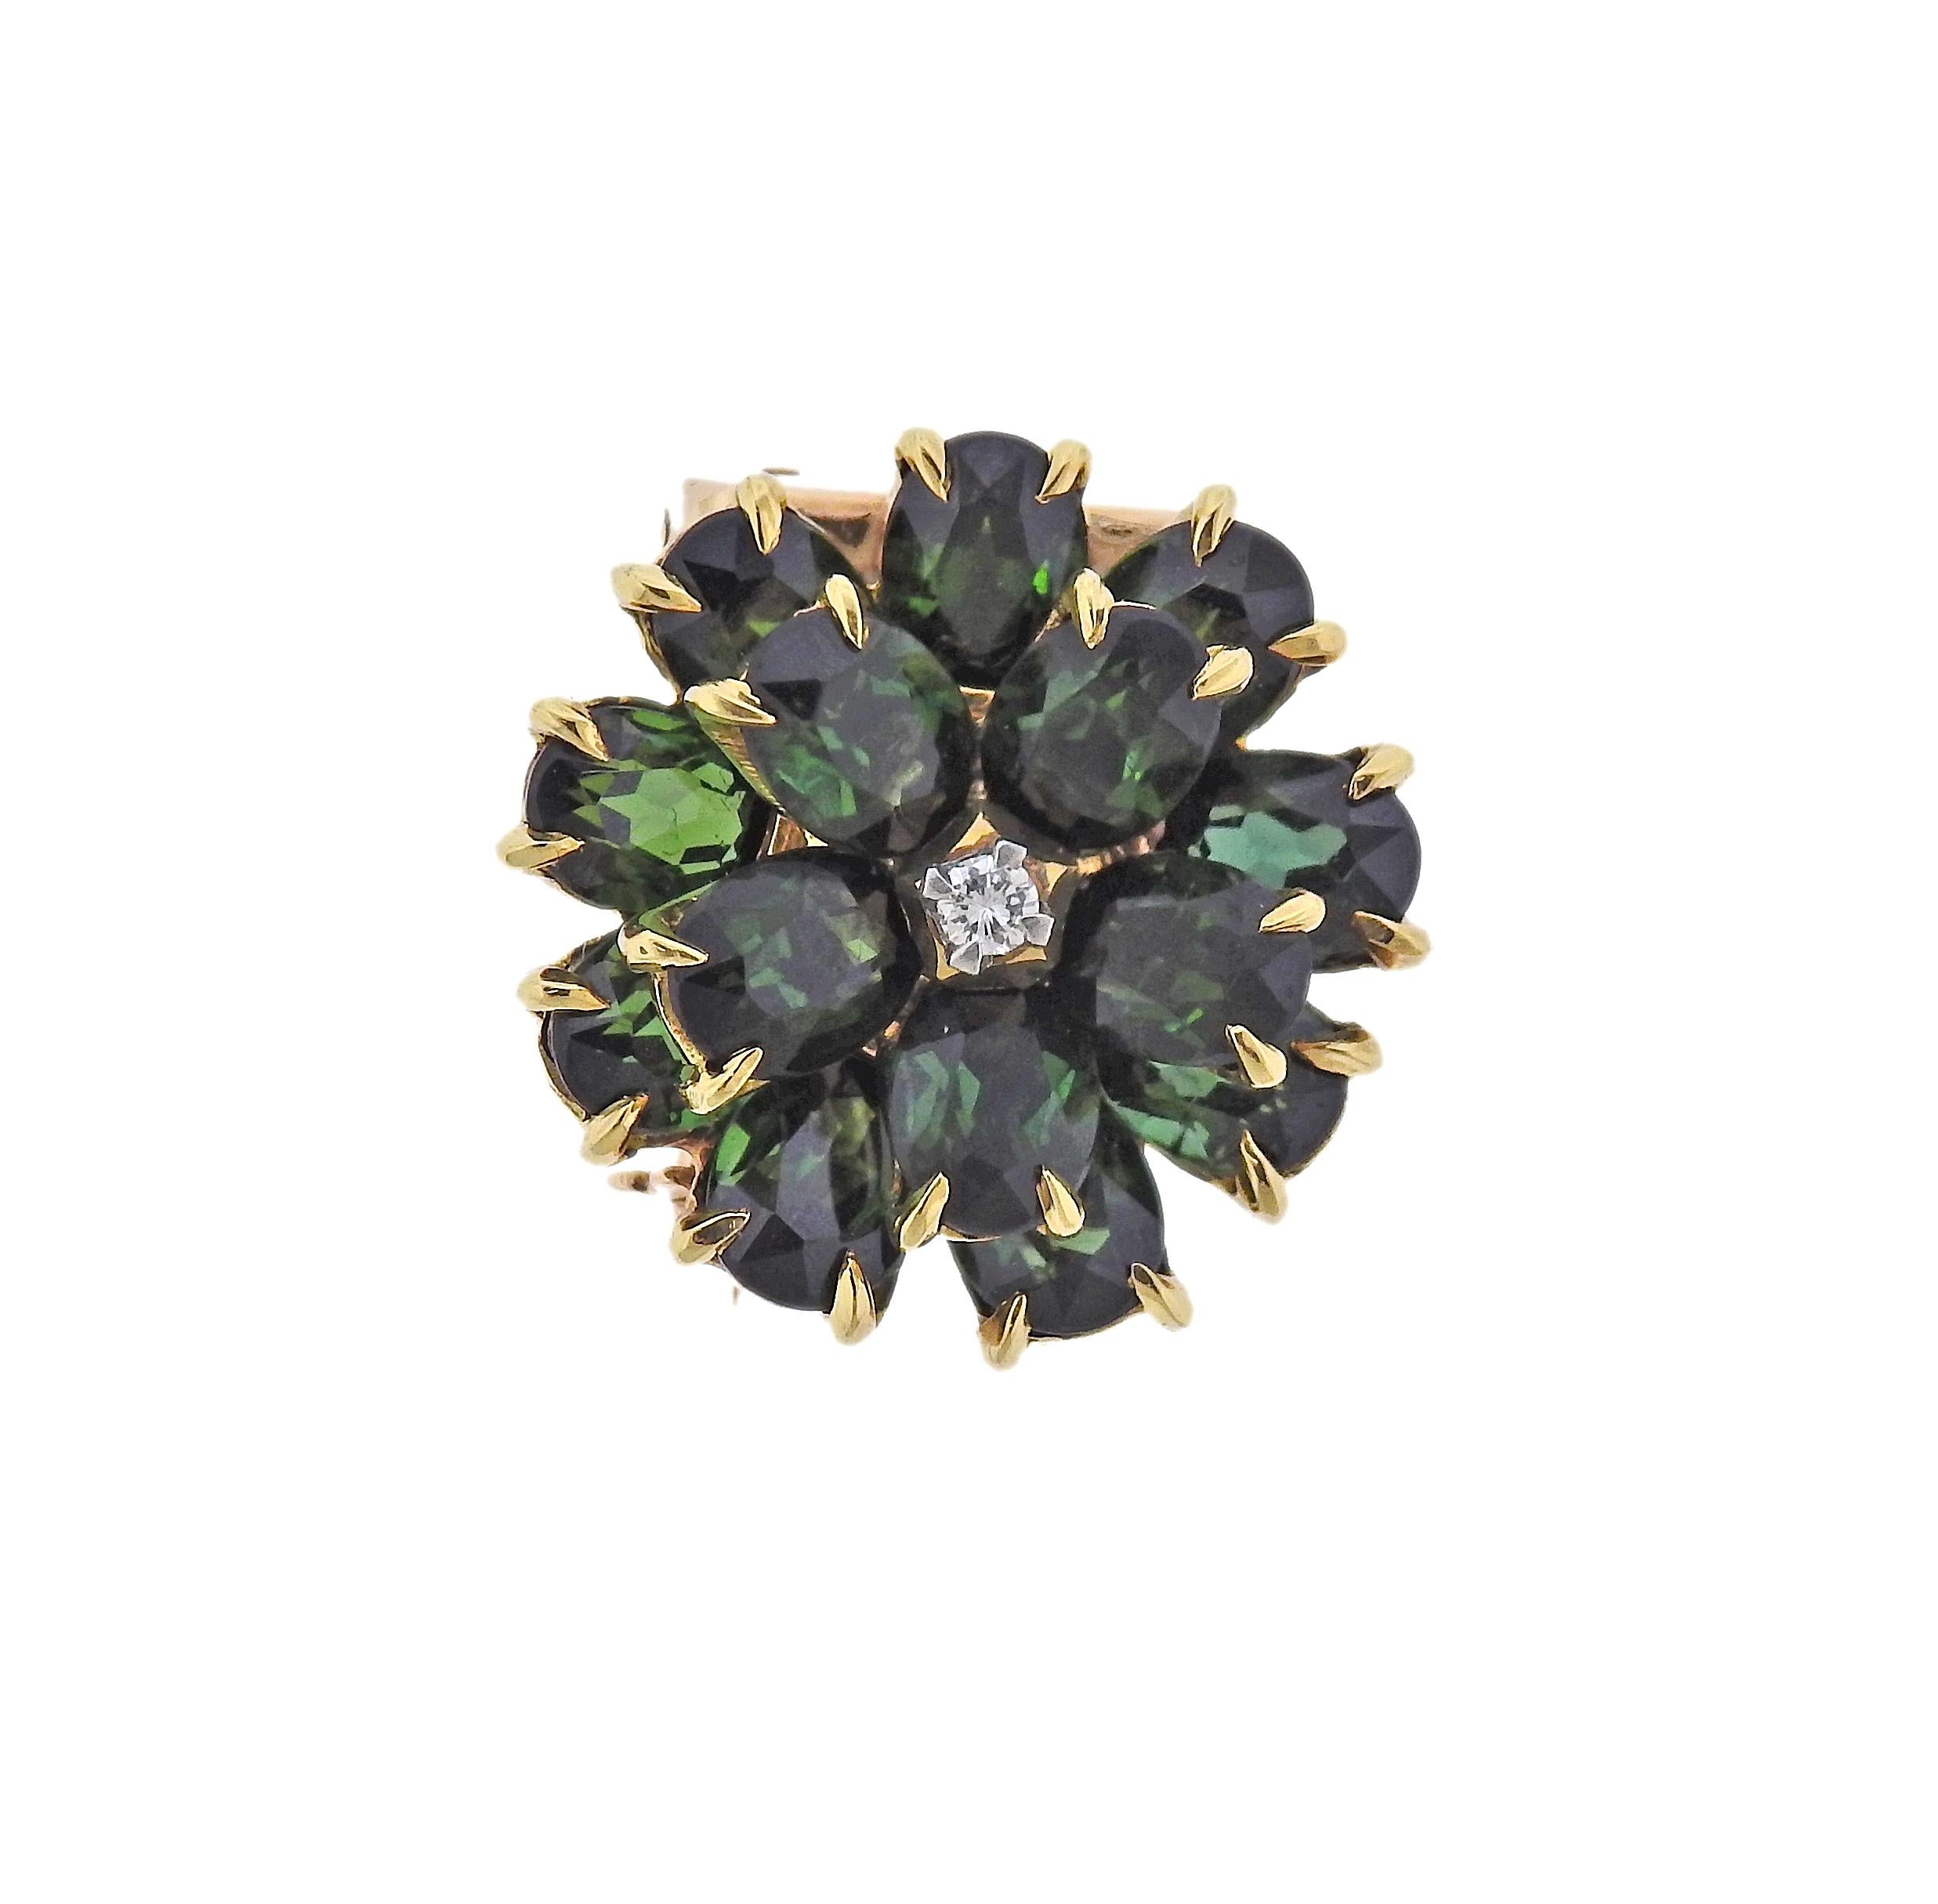 Retro 14k gold flower brooch by Tiffany & Co, with green tourmalines and approx. 0.03ct G/VS diamond in the center. Brooch is 20mm in diameter. Marked: Tiffany & Co. Weight 9.4 grams.